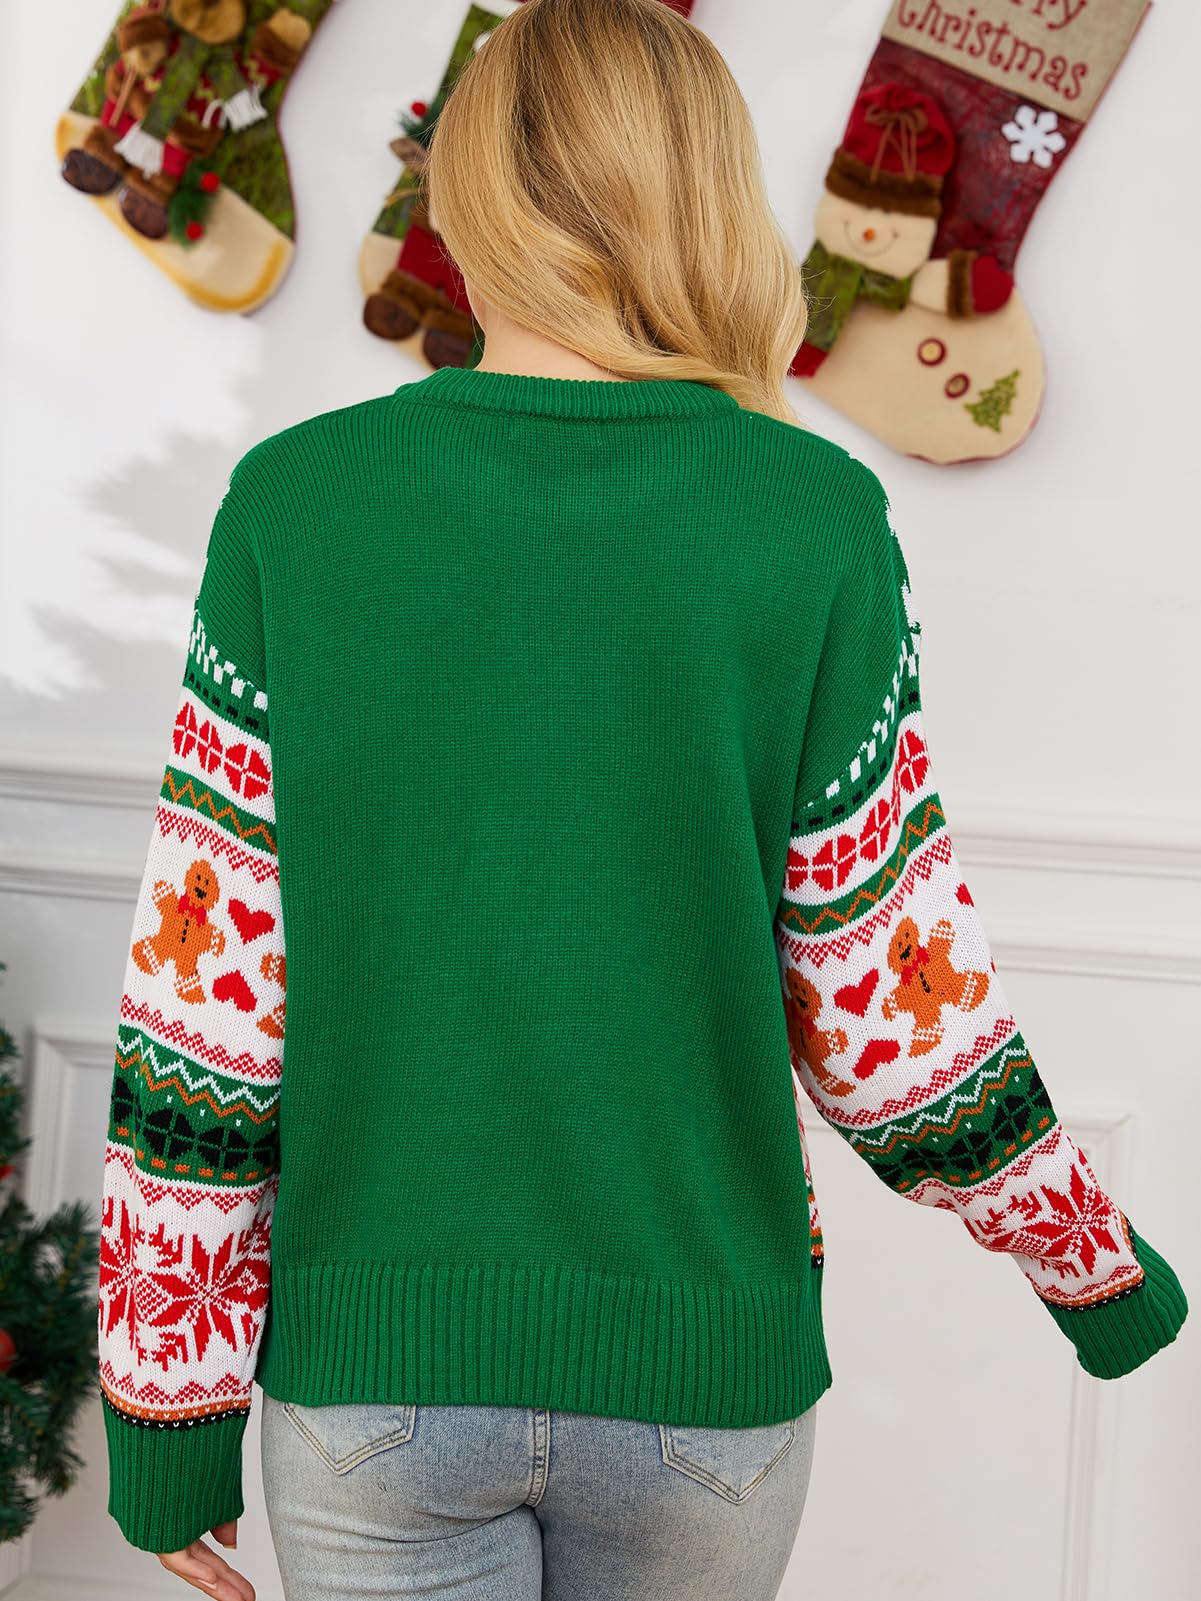 LANPULUX Christmas Sweater for Women Crewneck Adorable Ugly Christmas Sweater Family Matching Outfits Loose Pullover Knitwear